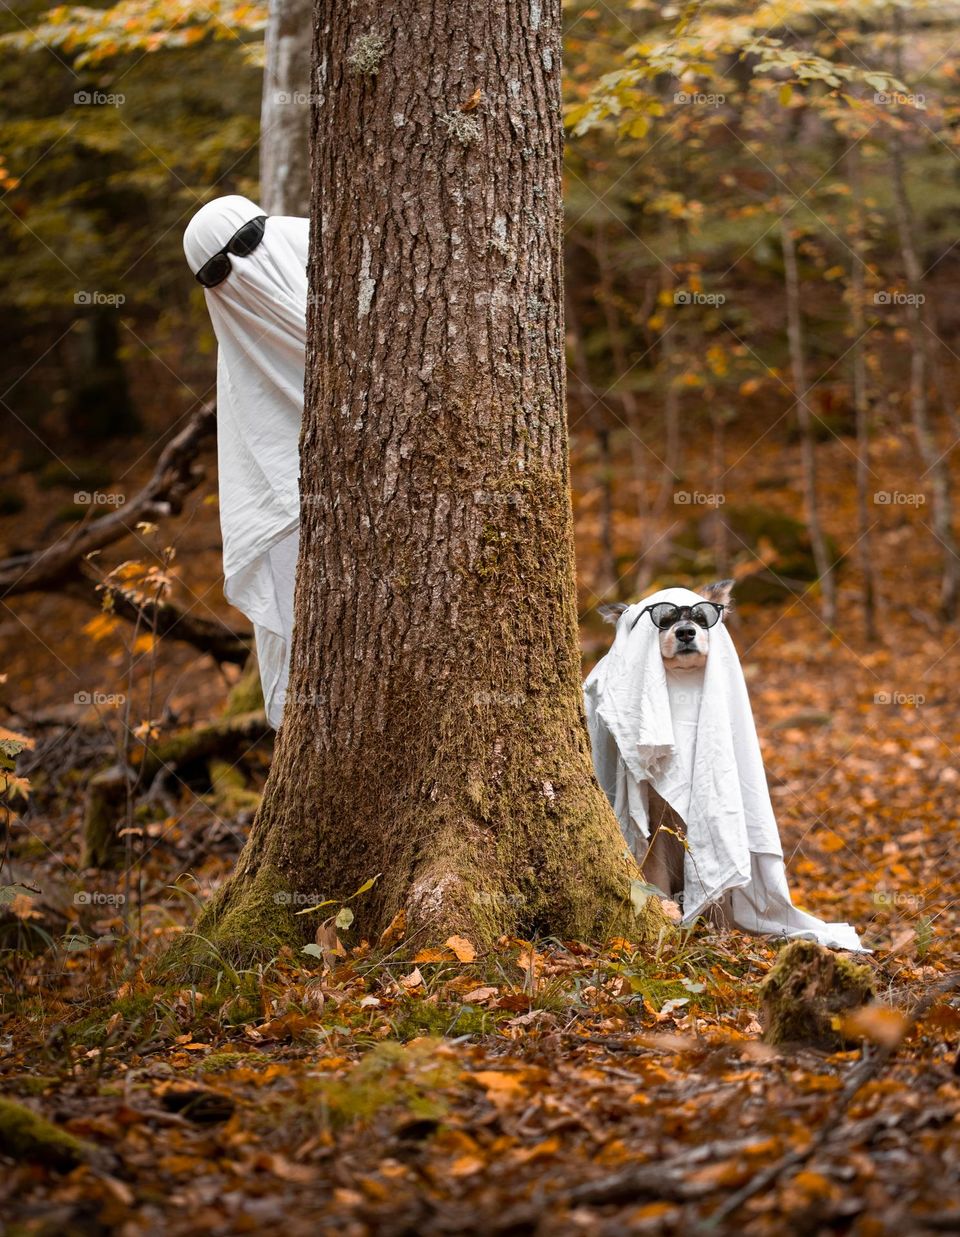 A person and dog dressed up as ghosts 